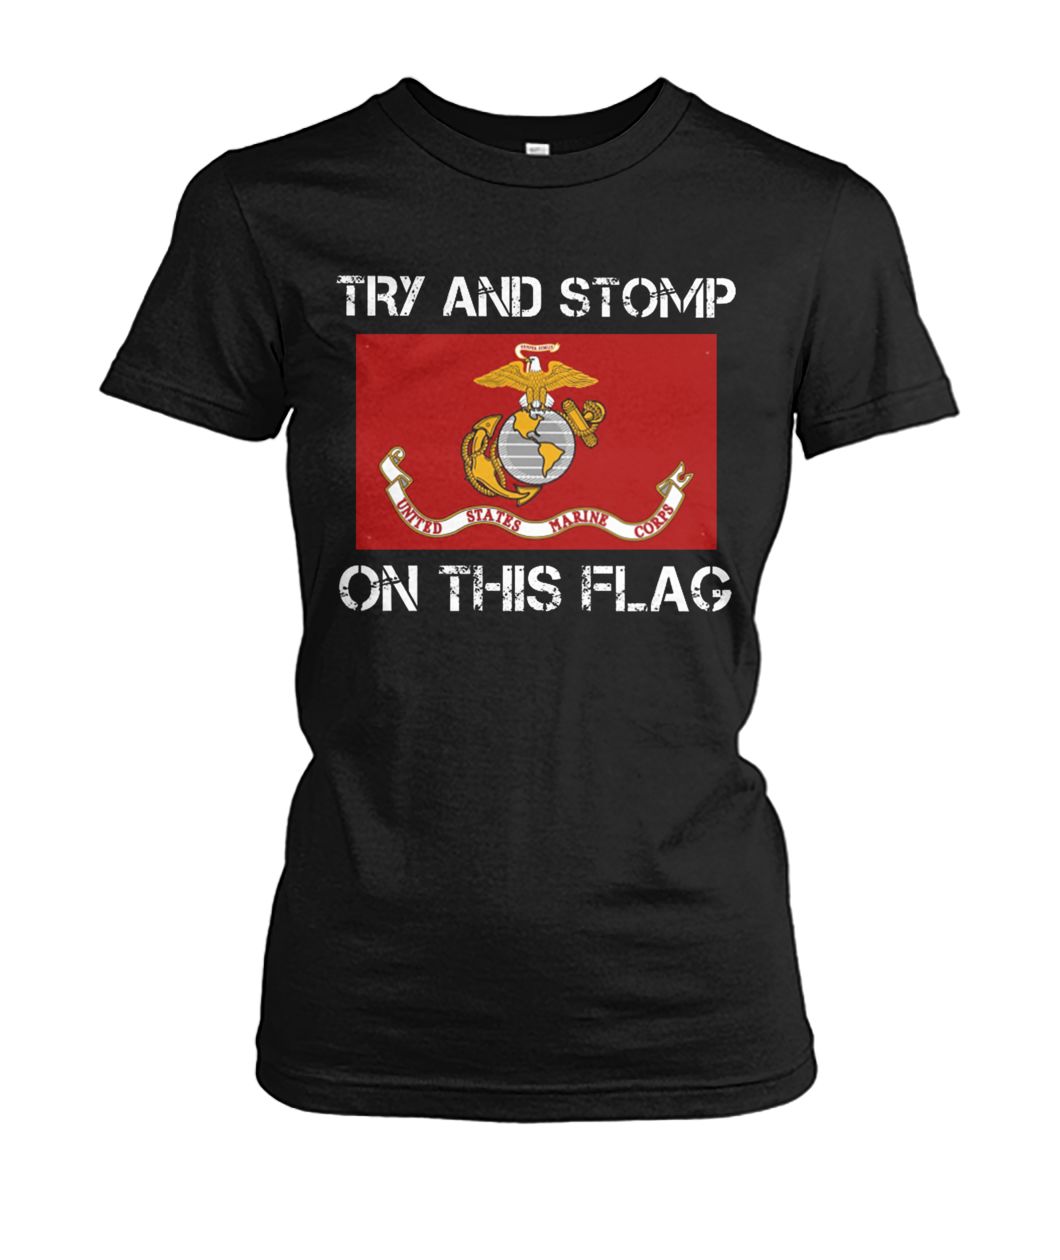 Try and stomp on this flag united states marine corps flag women's crew tee